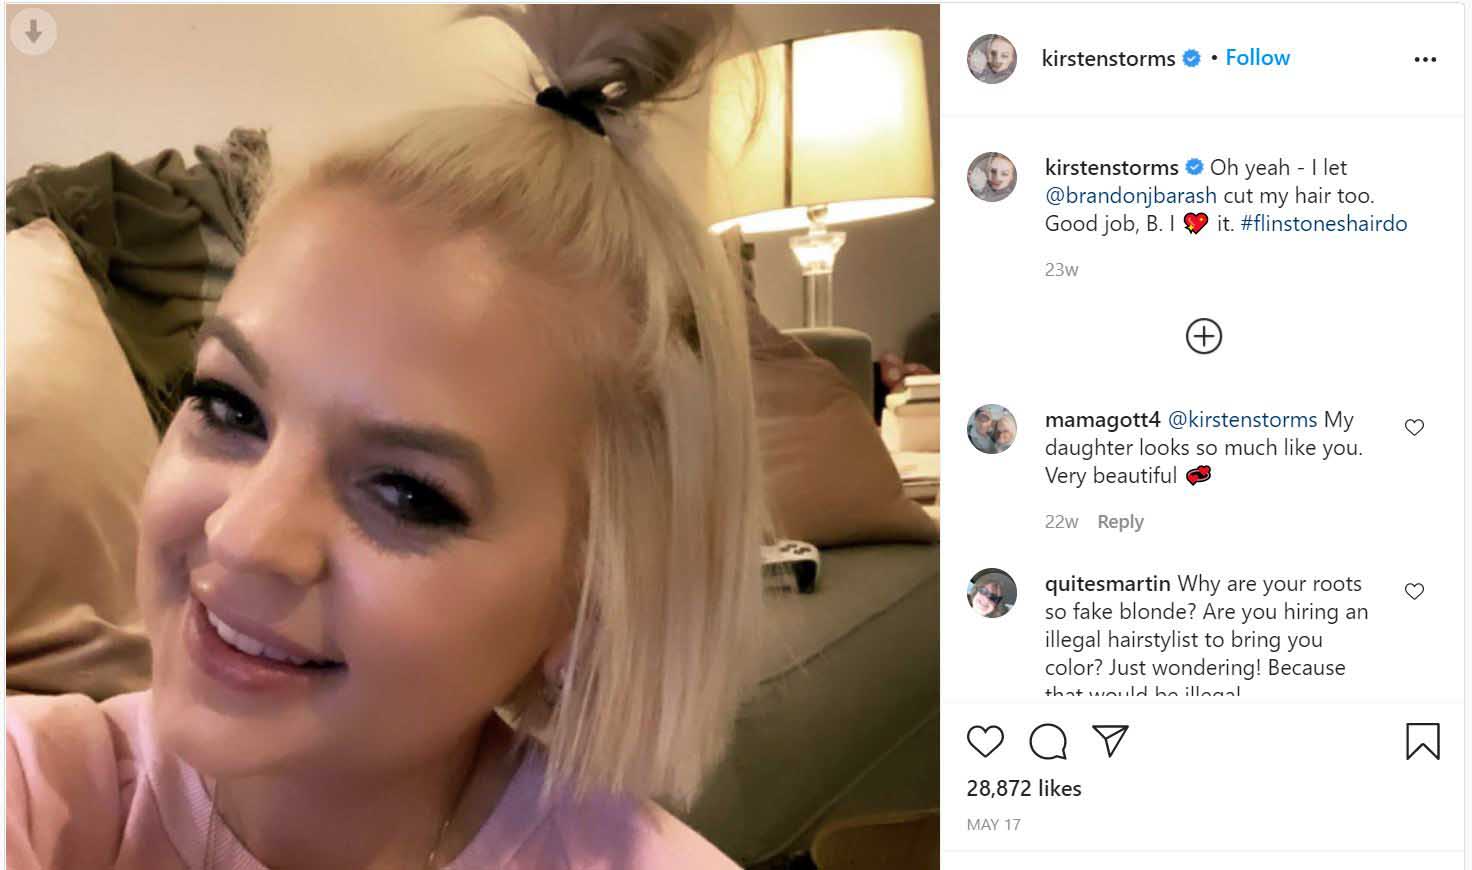 Post of Kirsten Storms getting haircut from former husband, Brandon.